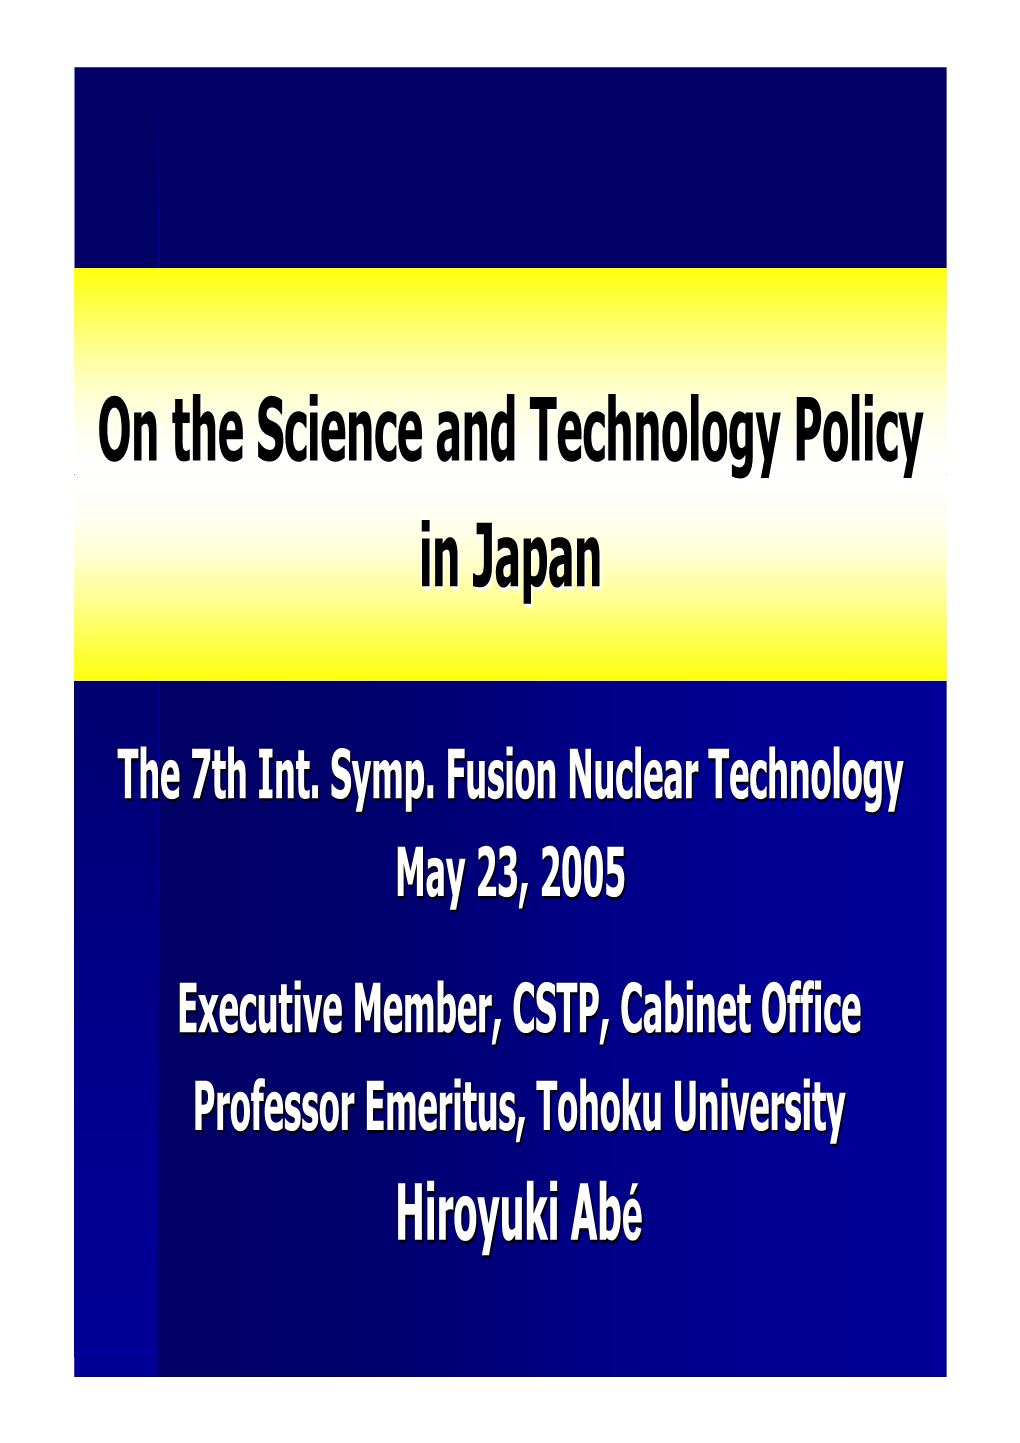 On the Science and Technology Policy in Japan